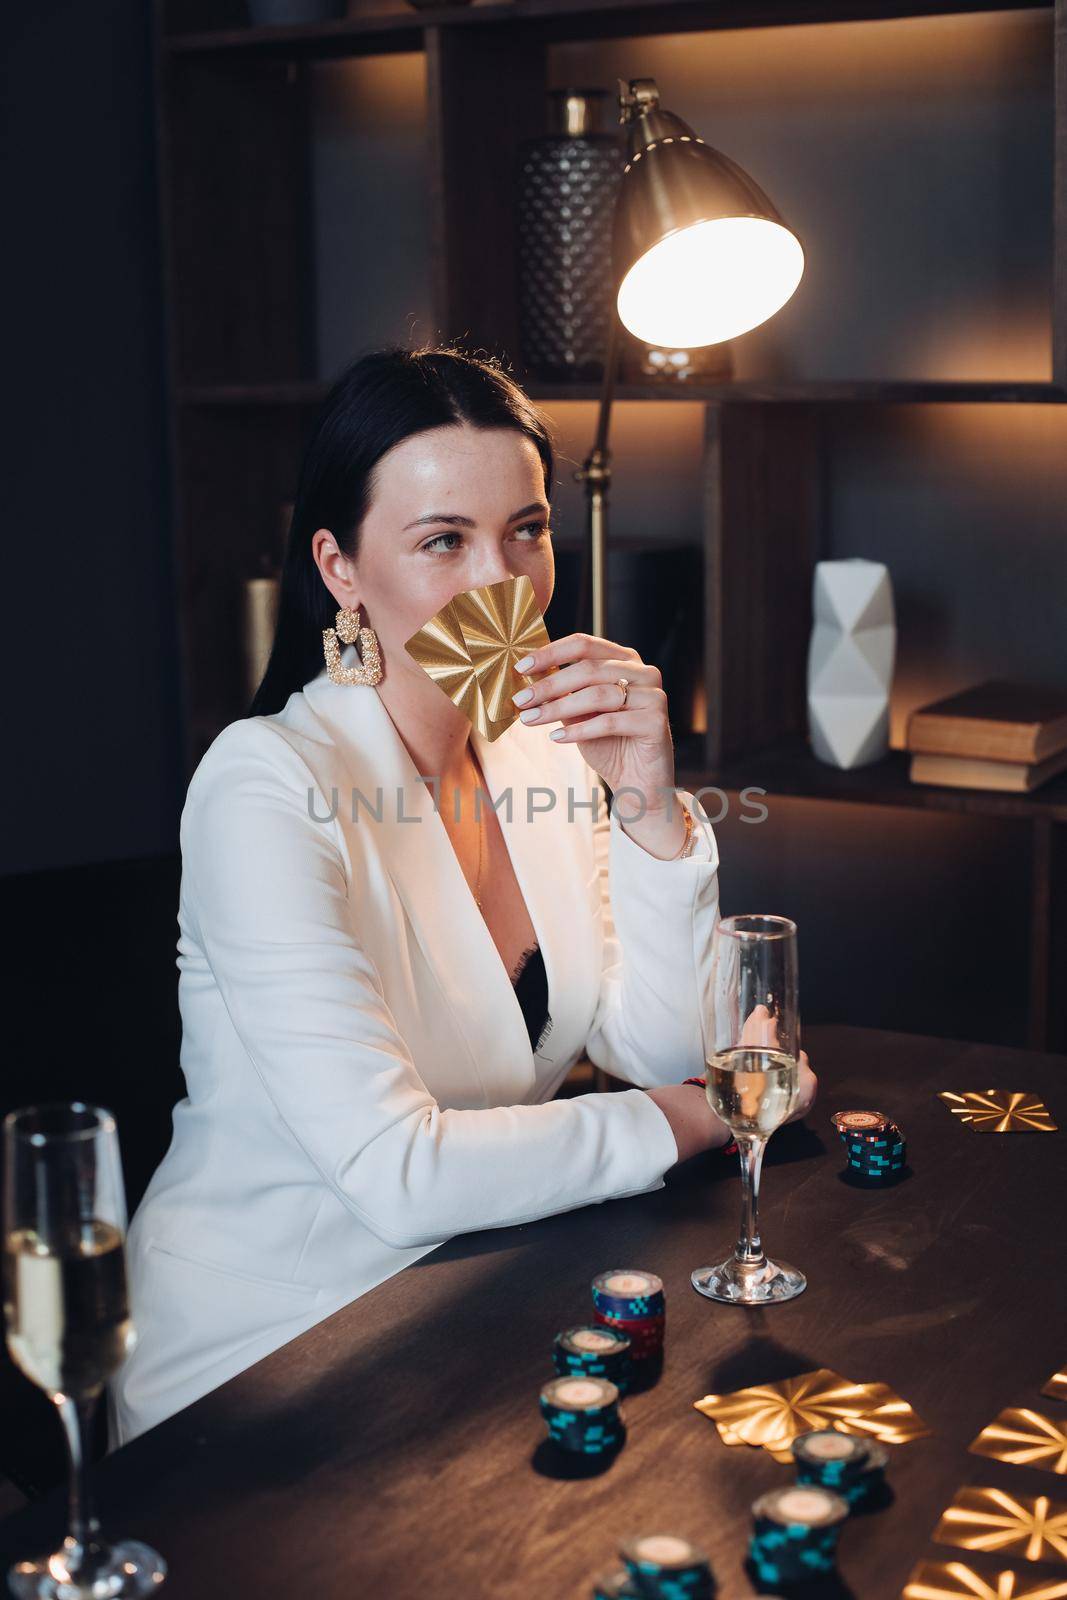 Stock photo portrait of gorgeous mystic woman in white jacket with black hair sitting at poker table with chips holding two cards in her hand and looking at her opponent. She is having a glass of champagne in front of her.